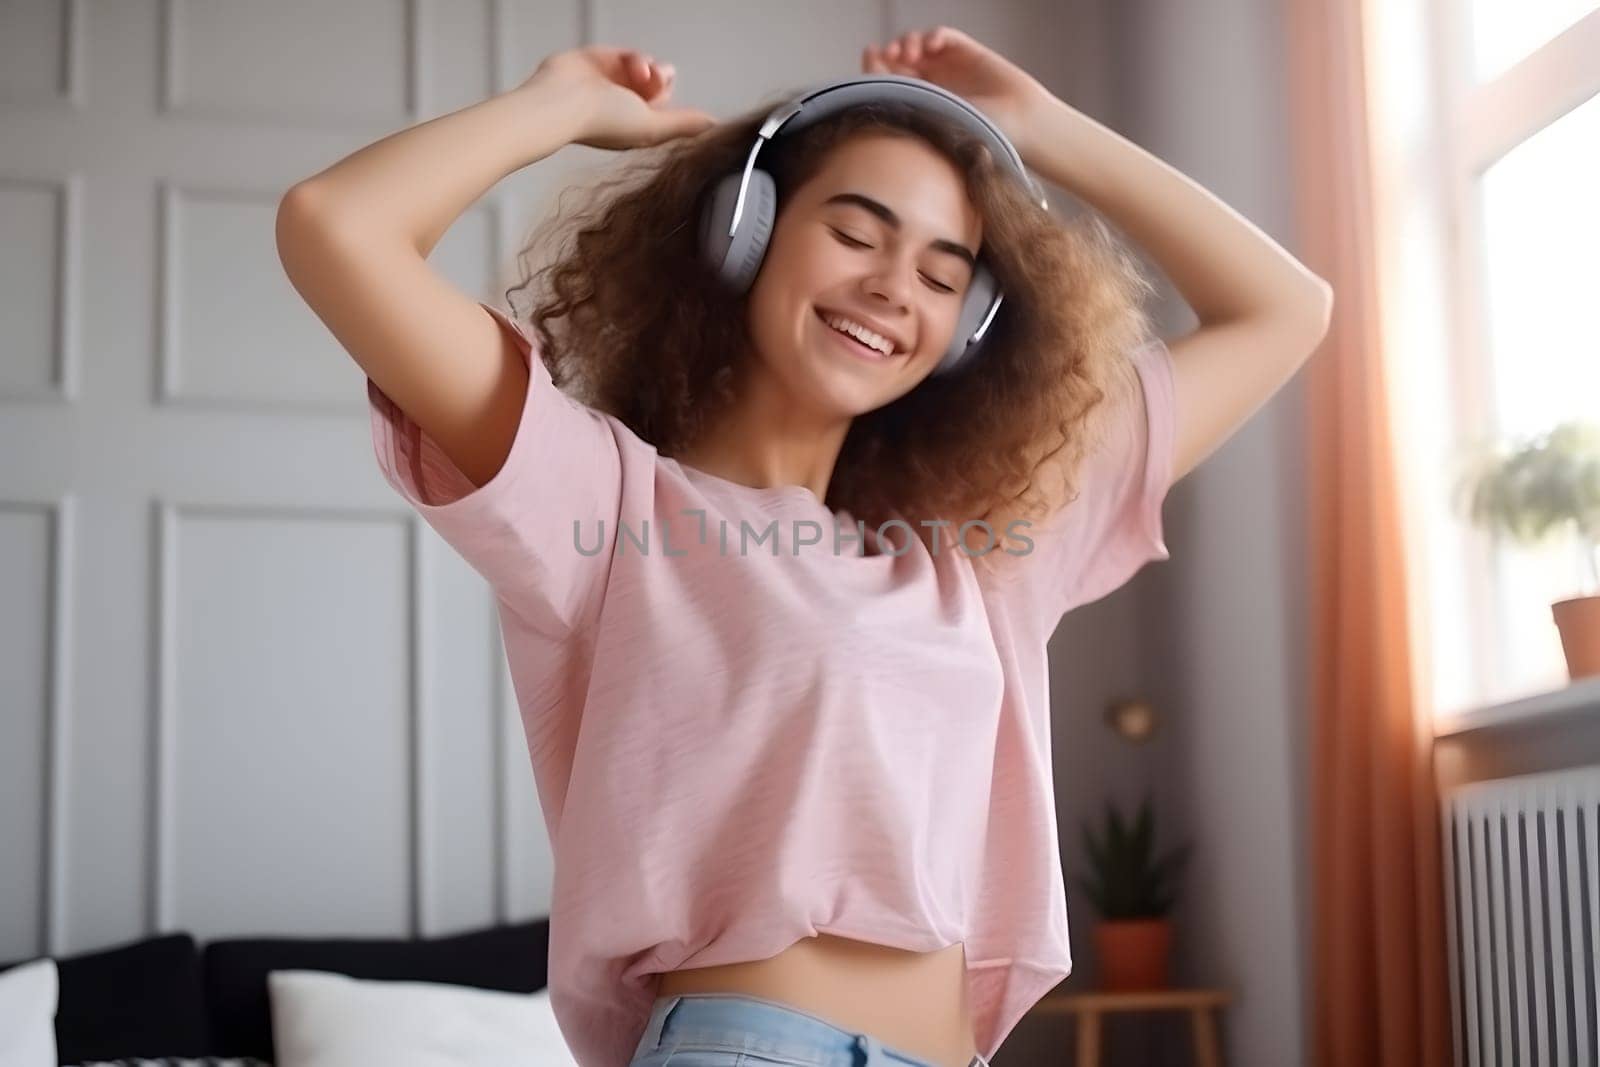 Overjoyed millennial girl wearing headphones having fun with music. Neural network generated in may 2023. Not based on any actual person, scene or pattern.